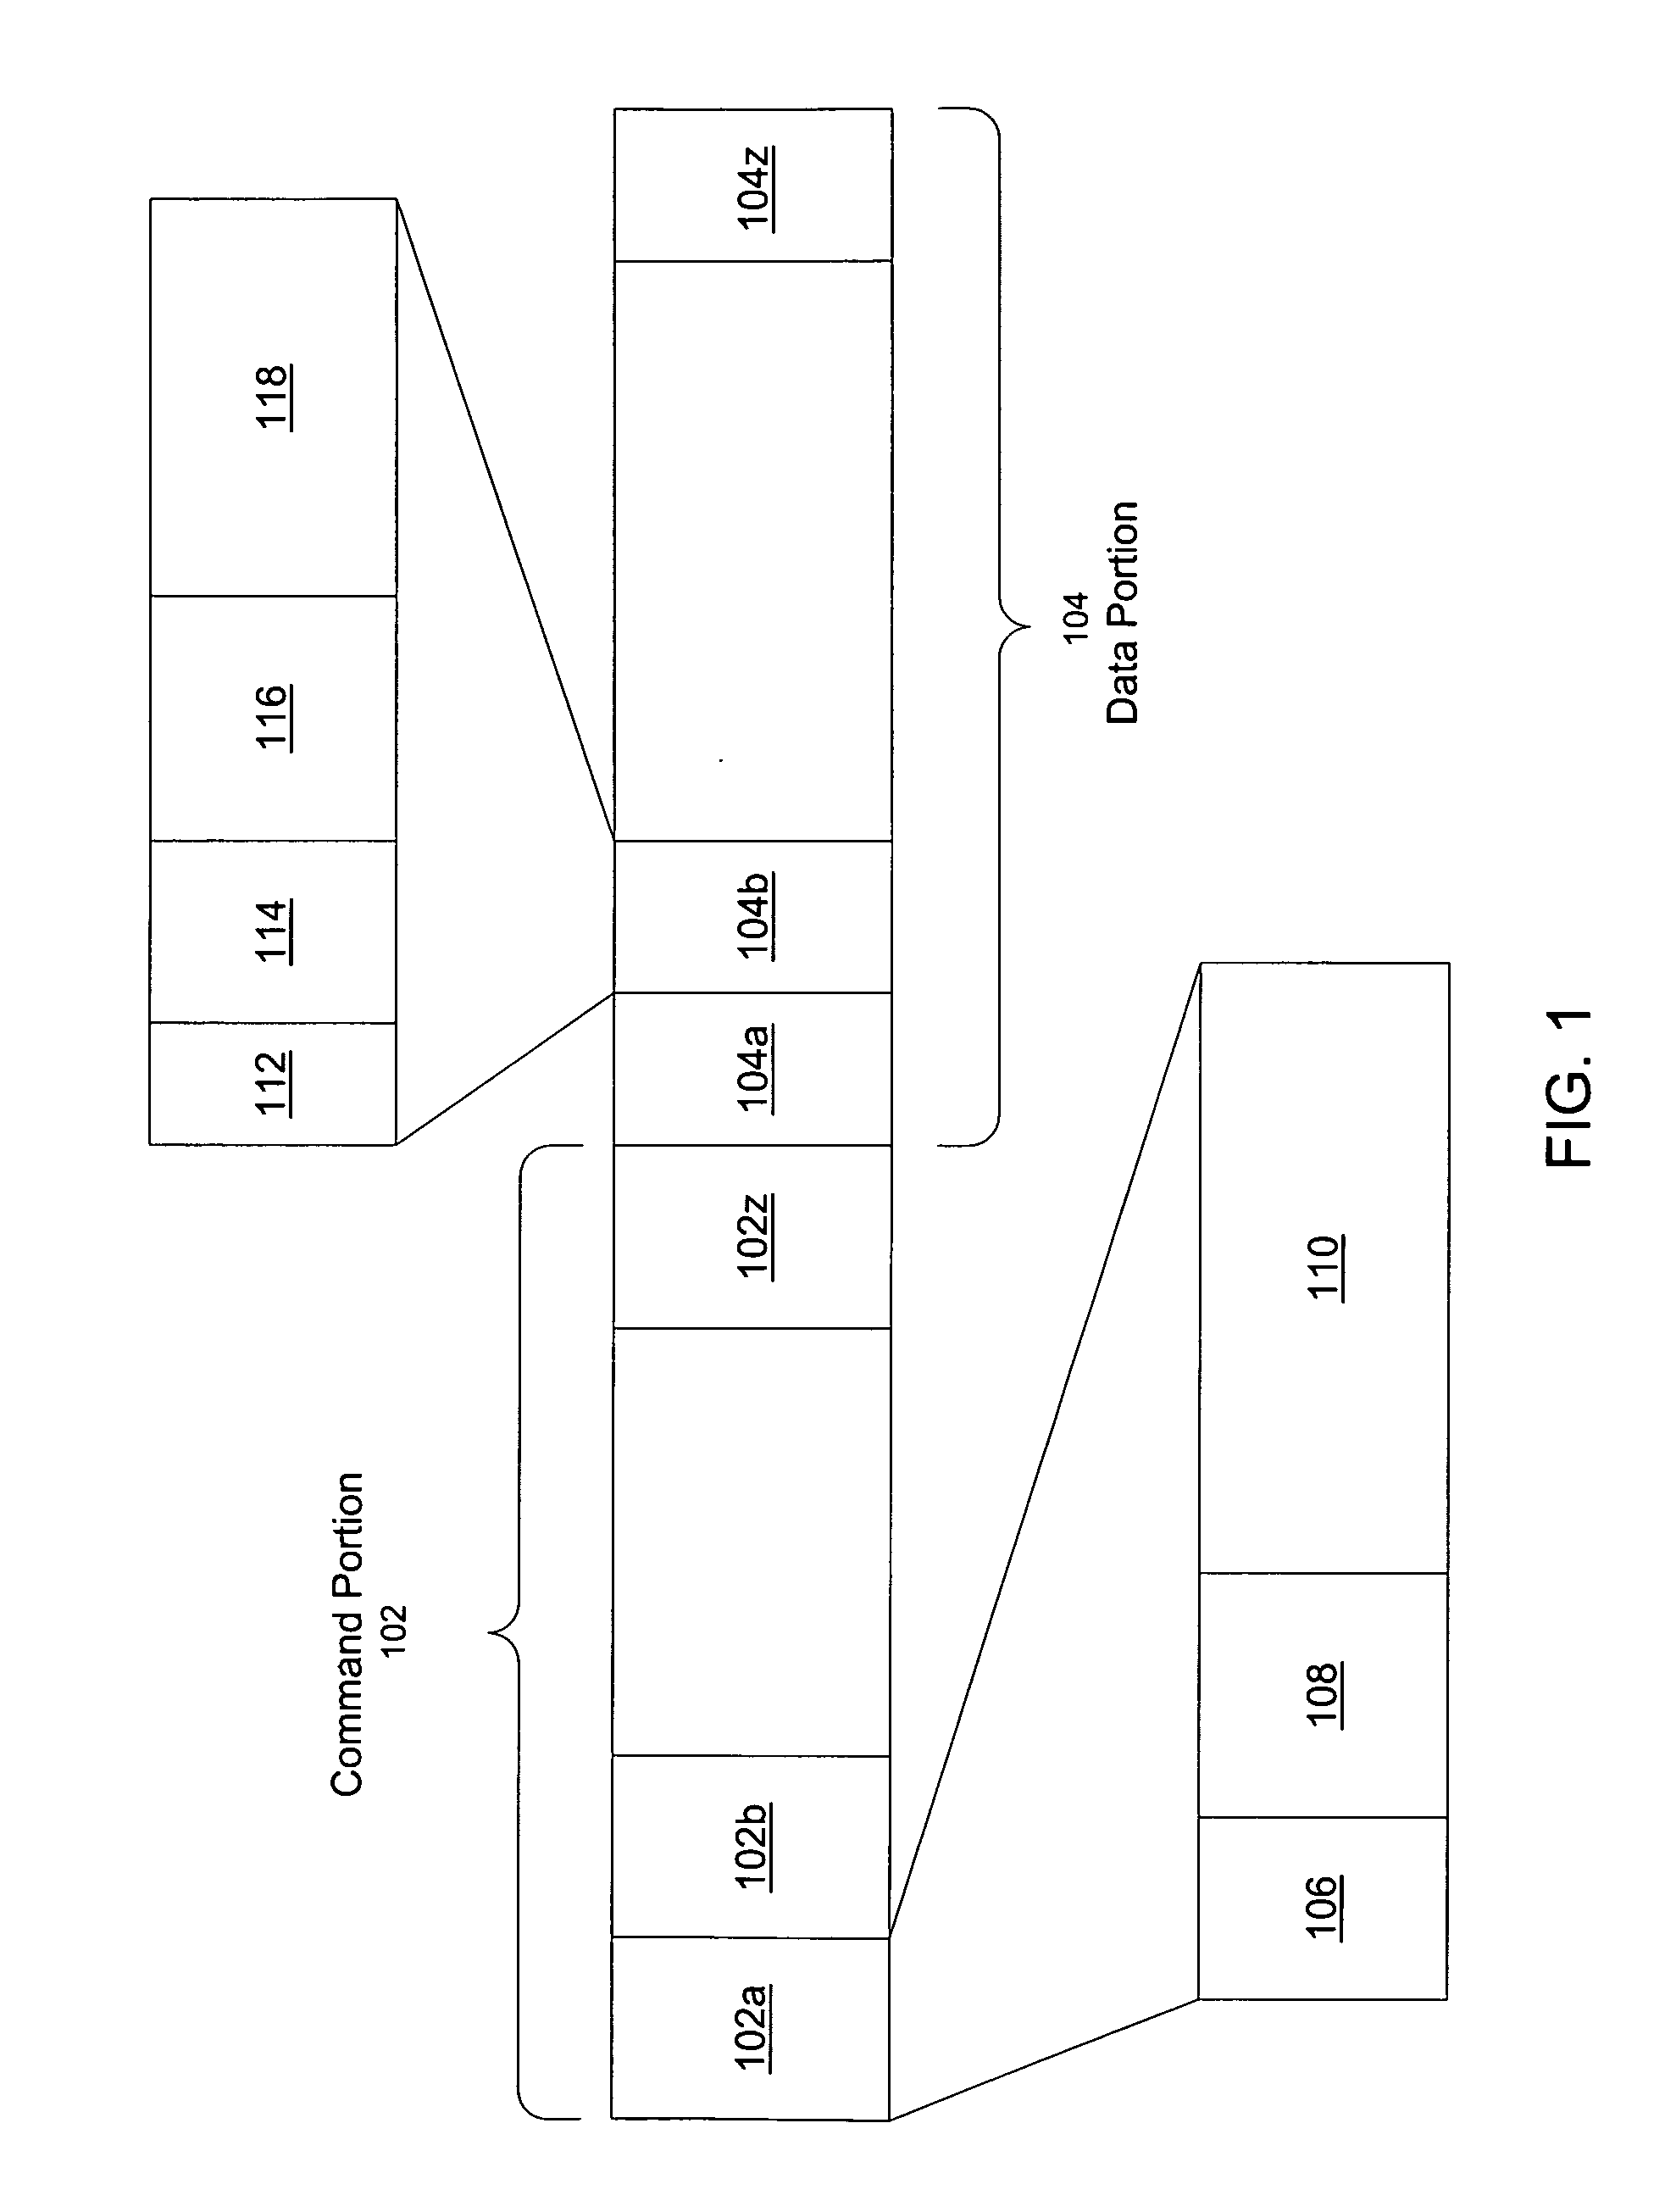 Method and apparatus for extracting information from a medical image